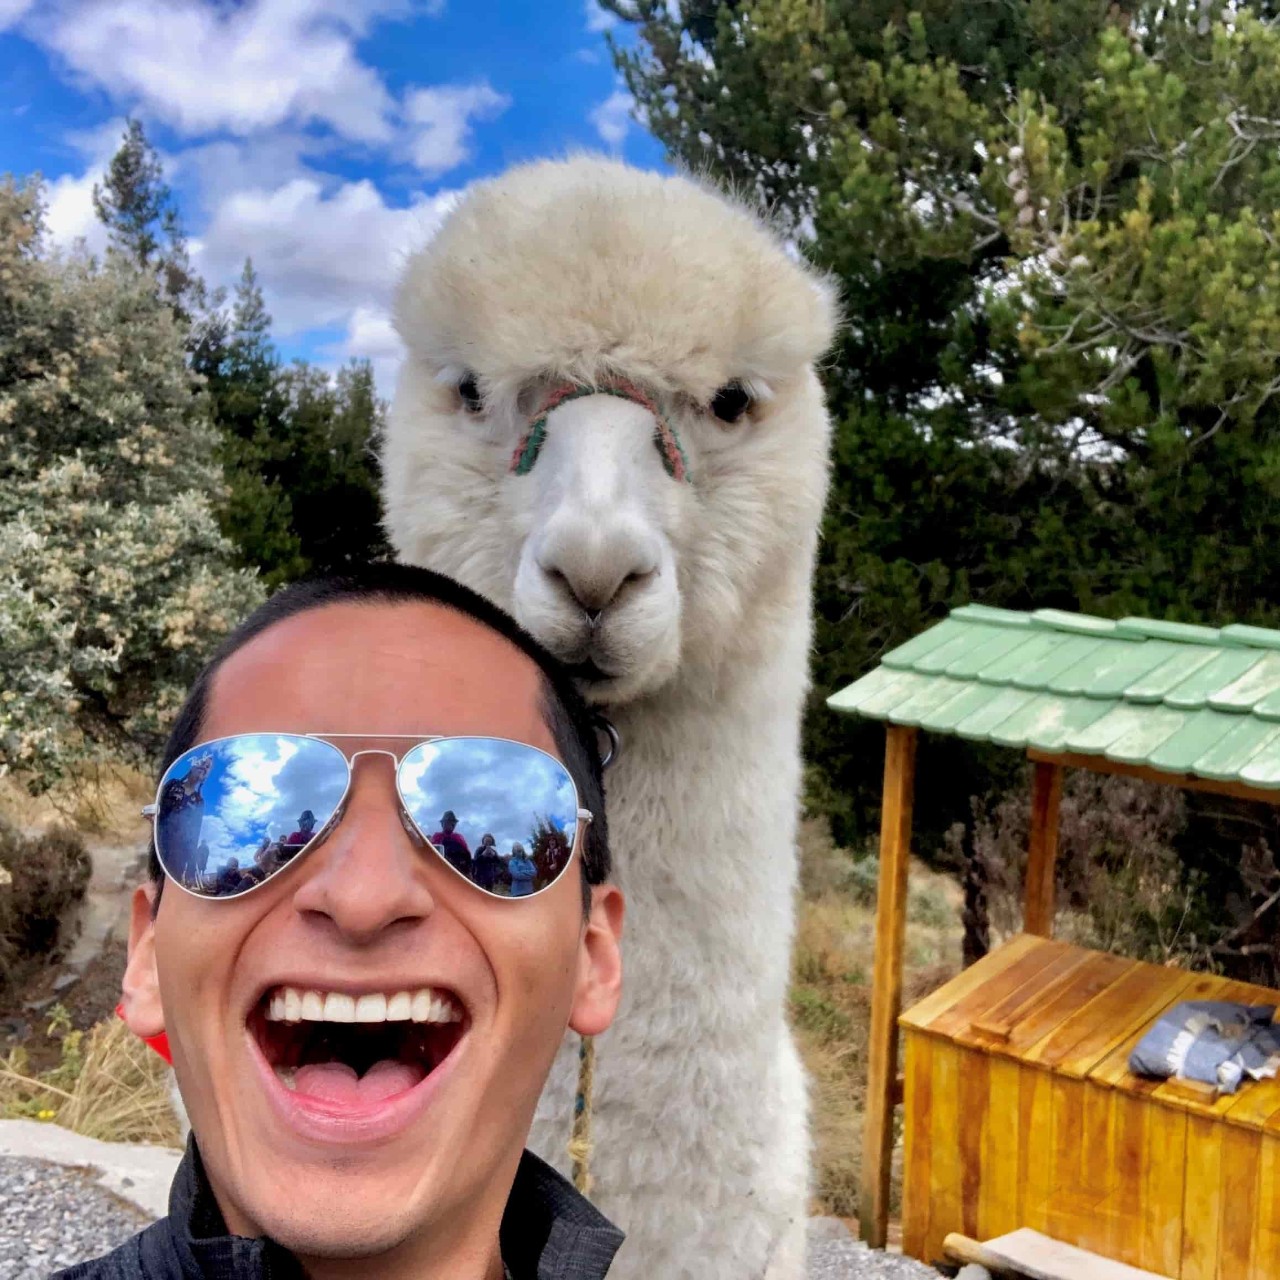 John Gehman '21 poses with an Alpaca while hiking the Quilotoa Volcano and Lagoon just south of Quito, Ecuador in September 2019.